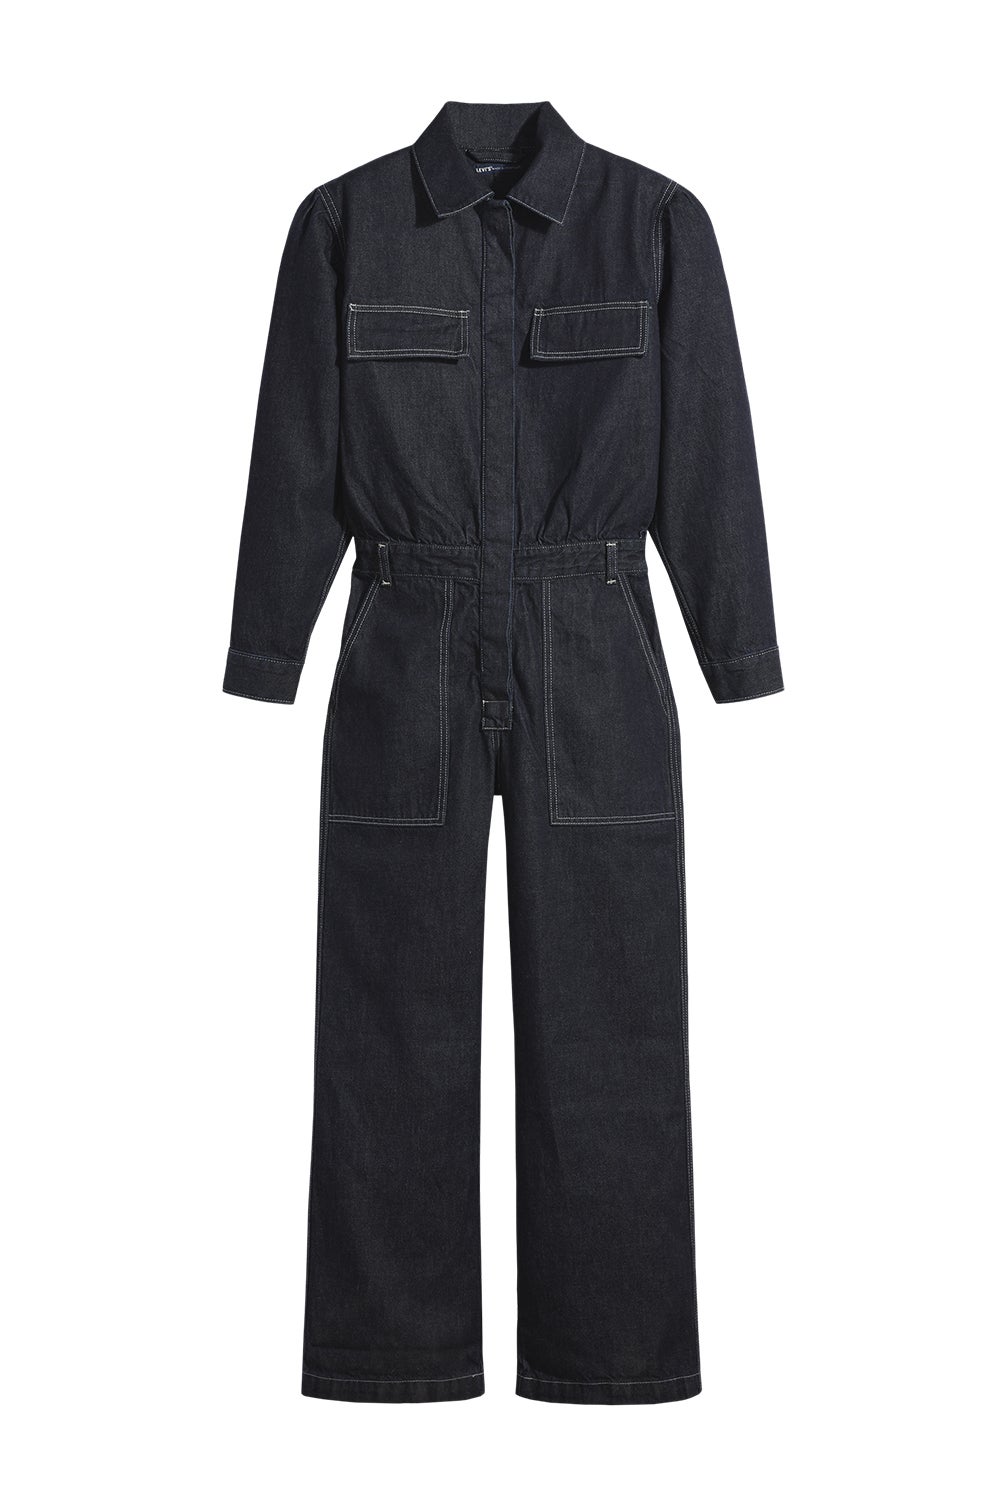 Levi's Made and Crafted Flight Suit Valley Rinse